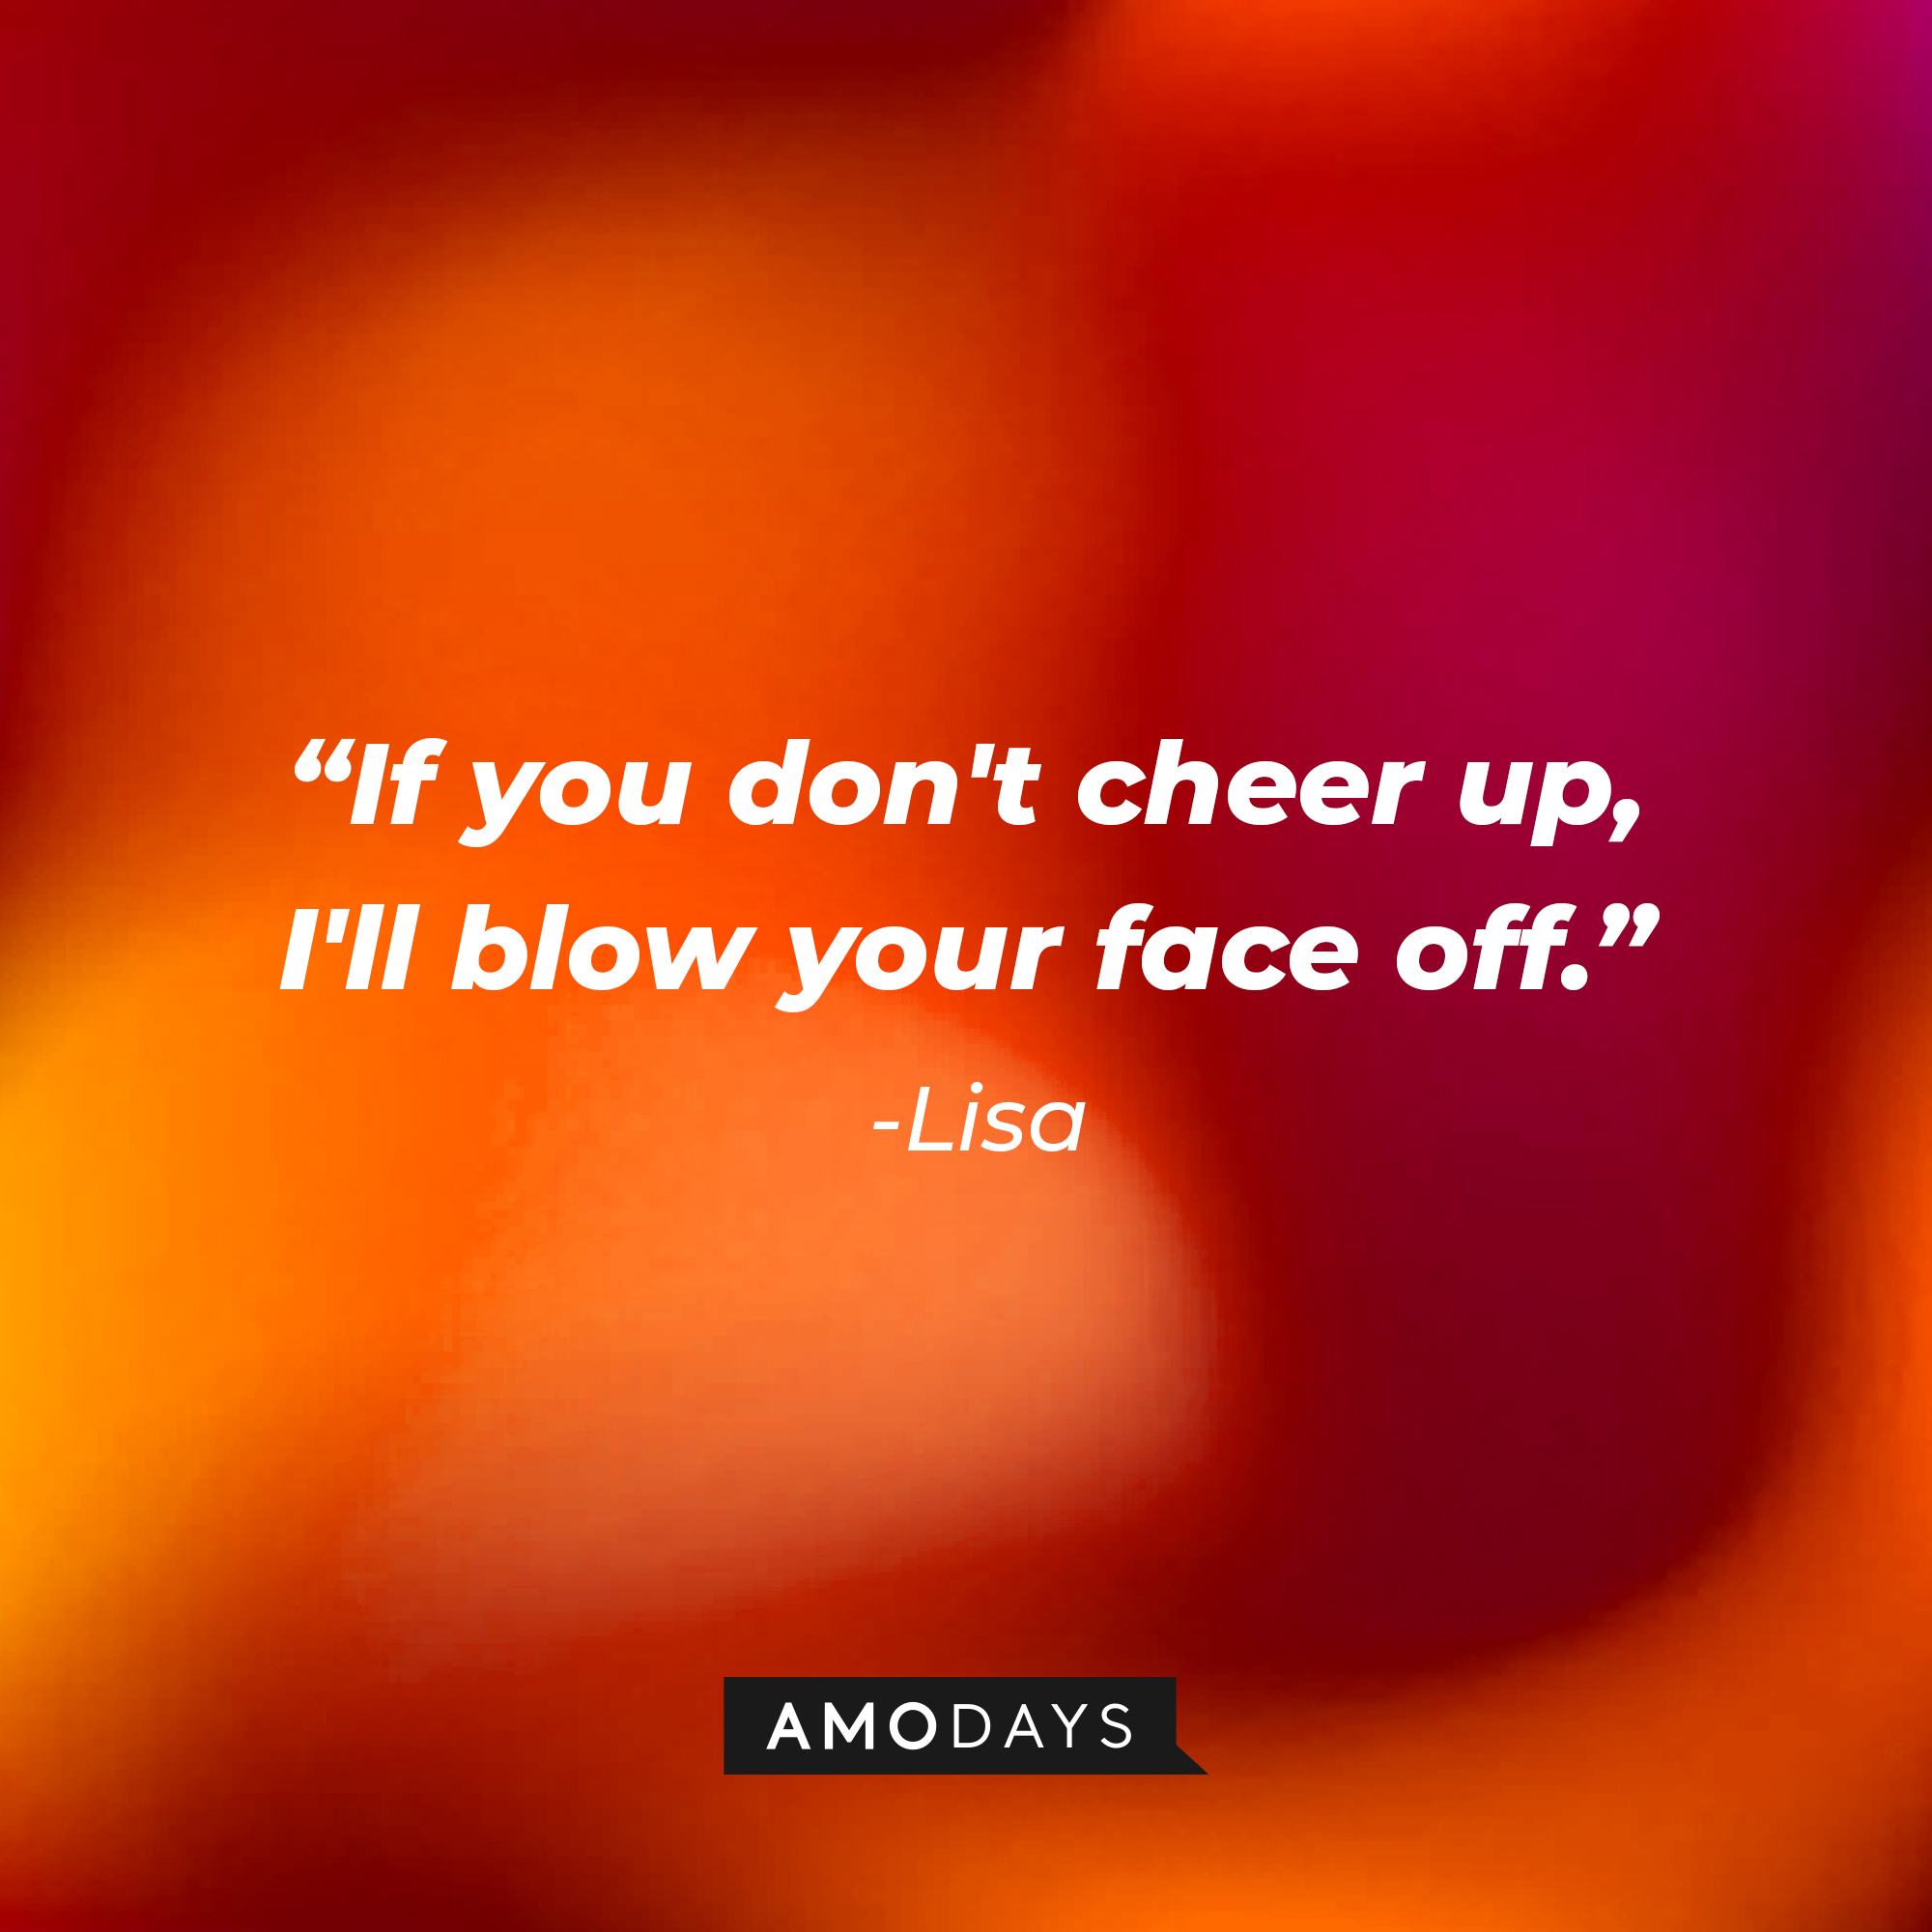 Lisa’s quote: “If you don't cheer up, I'll blow your face off.” | Source: AmoDays